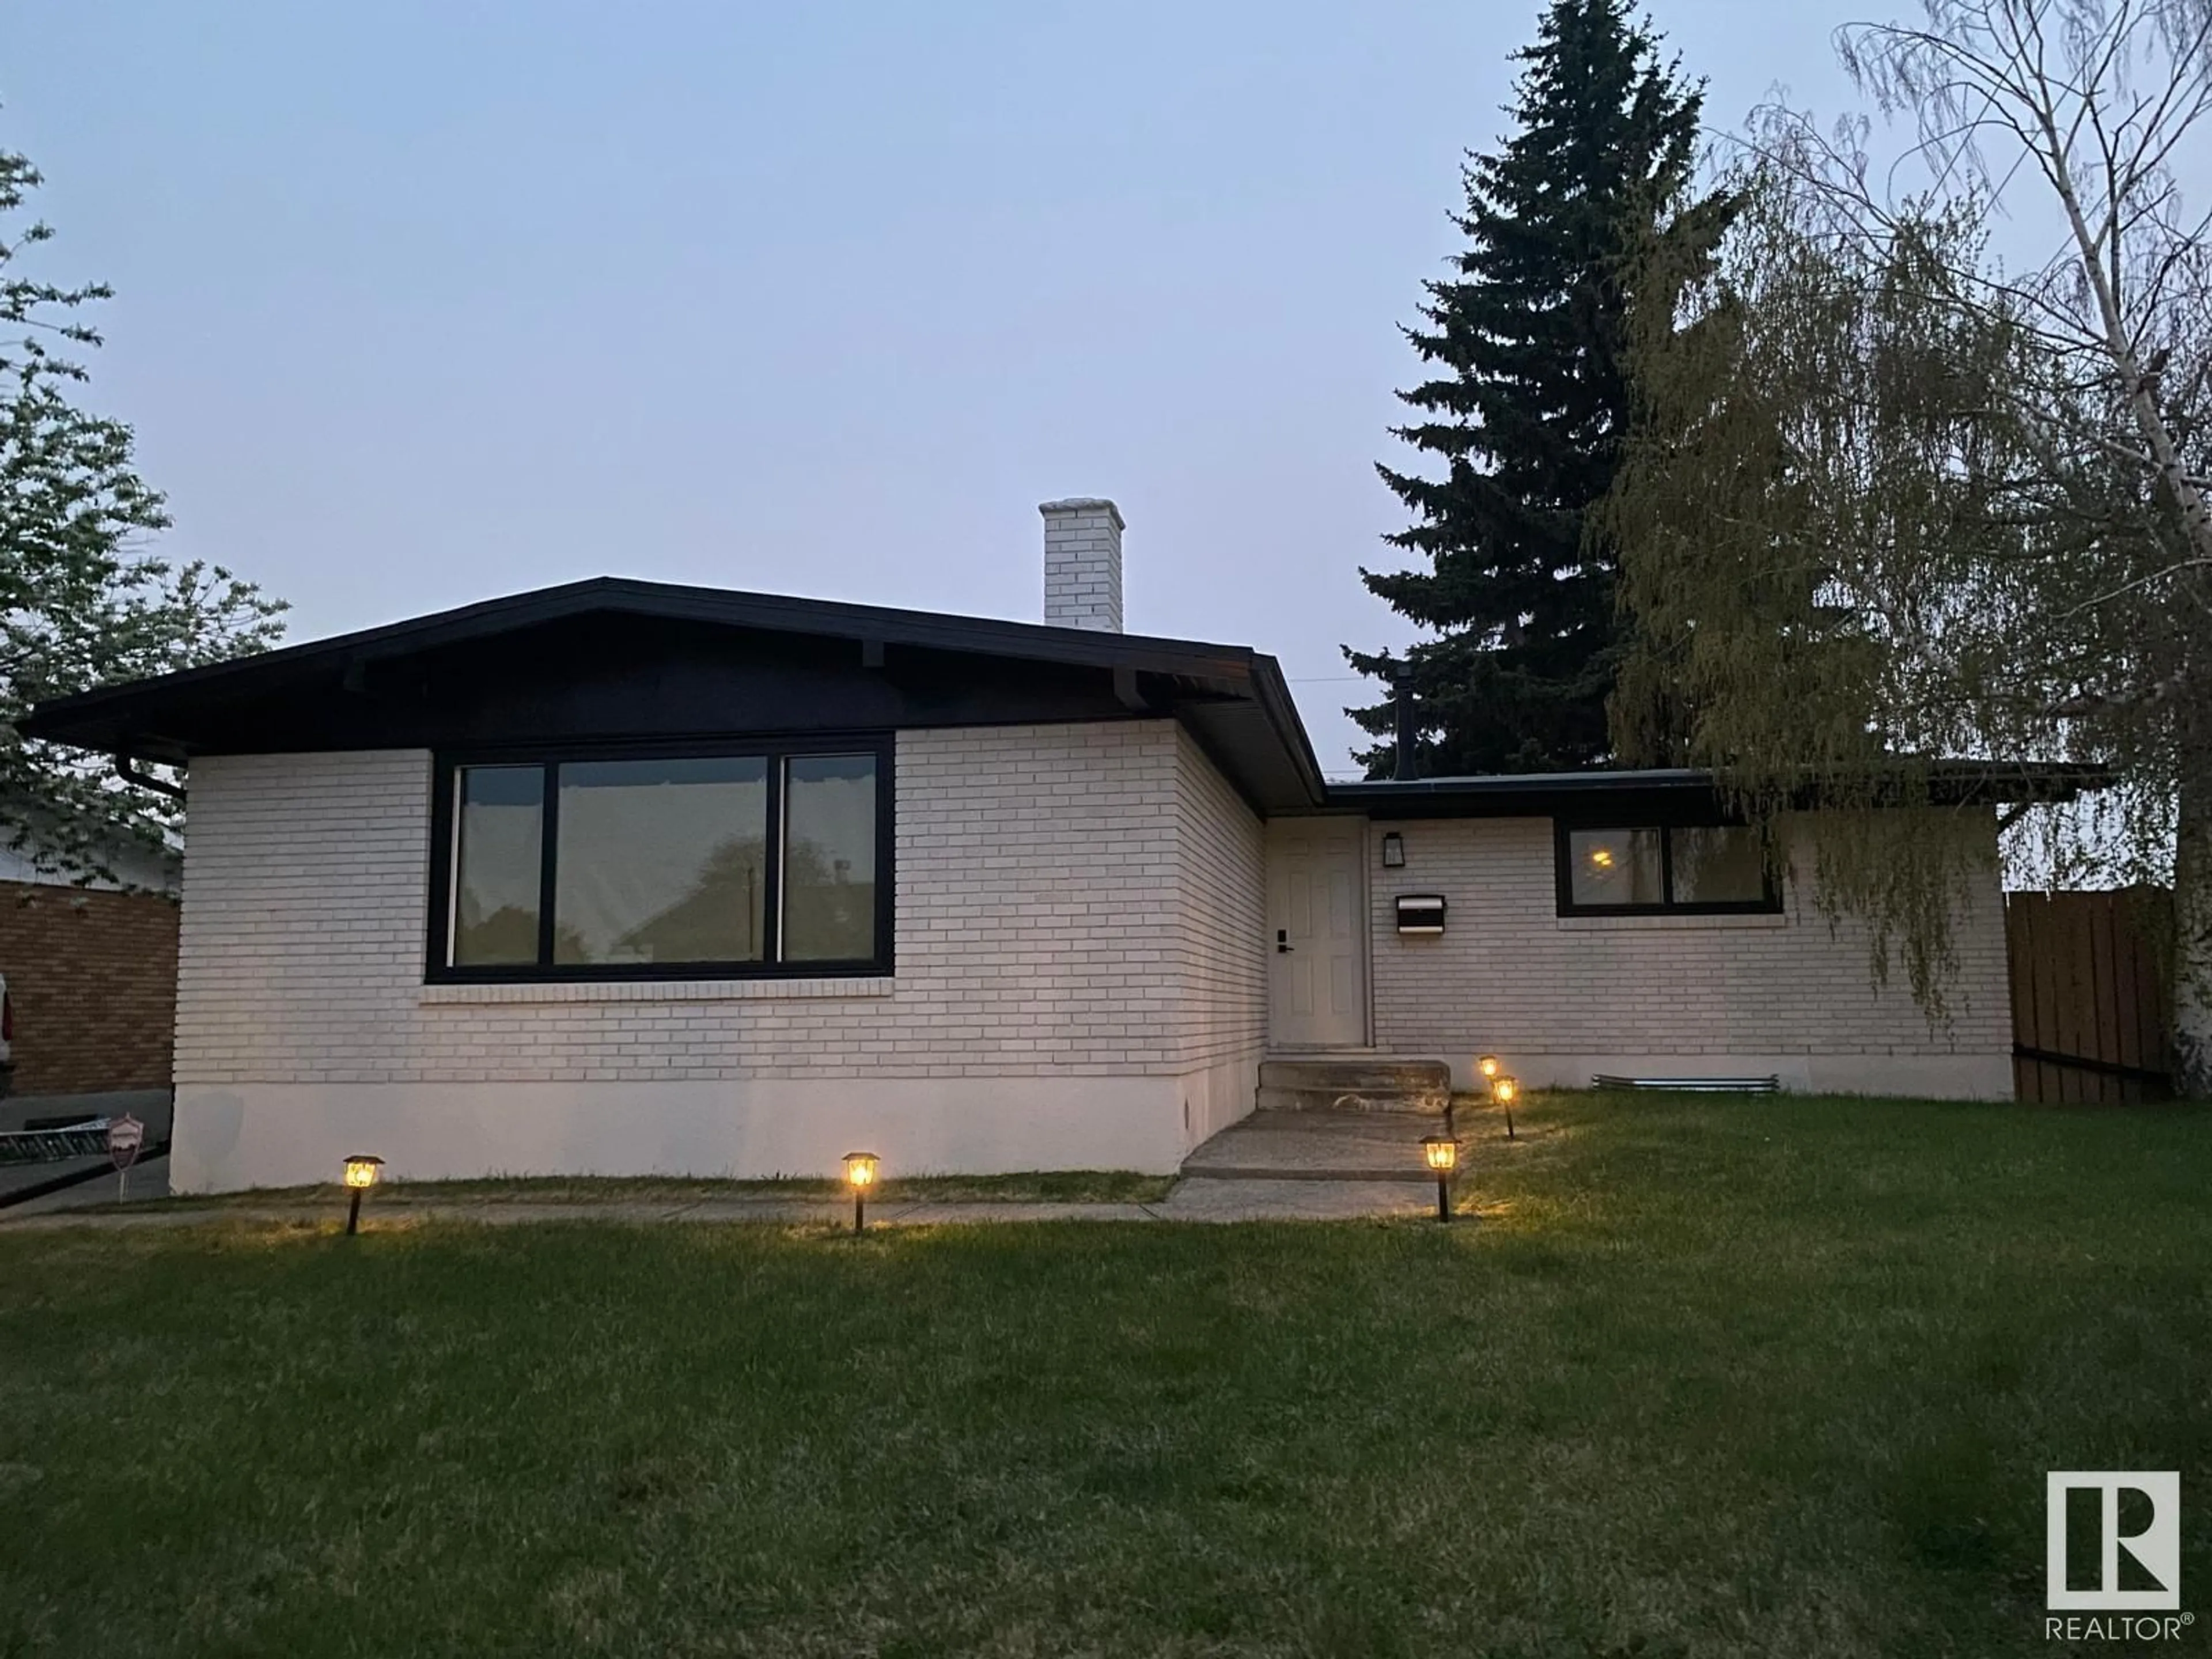 Outside view for 14008 54 ST NW, Edmonton Alberta T5A1L9